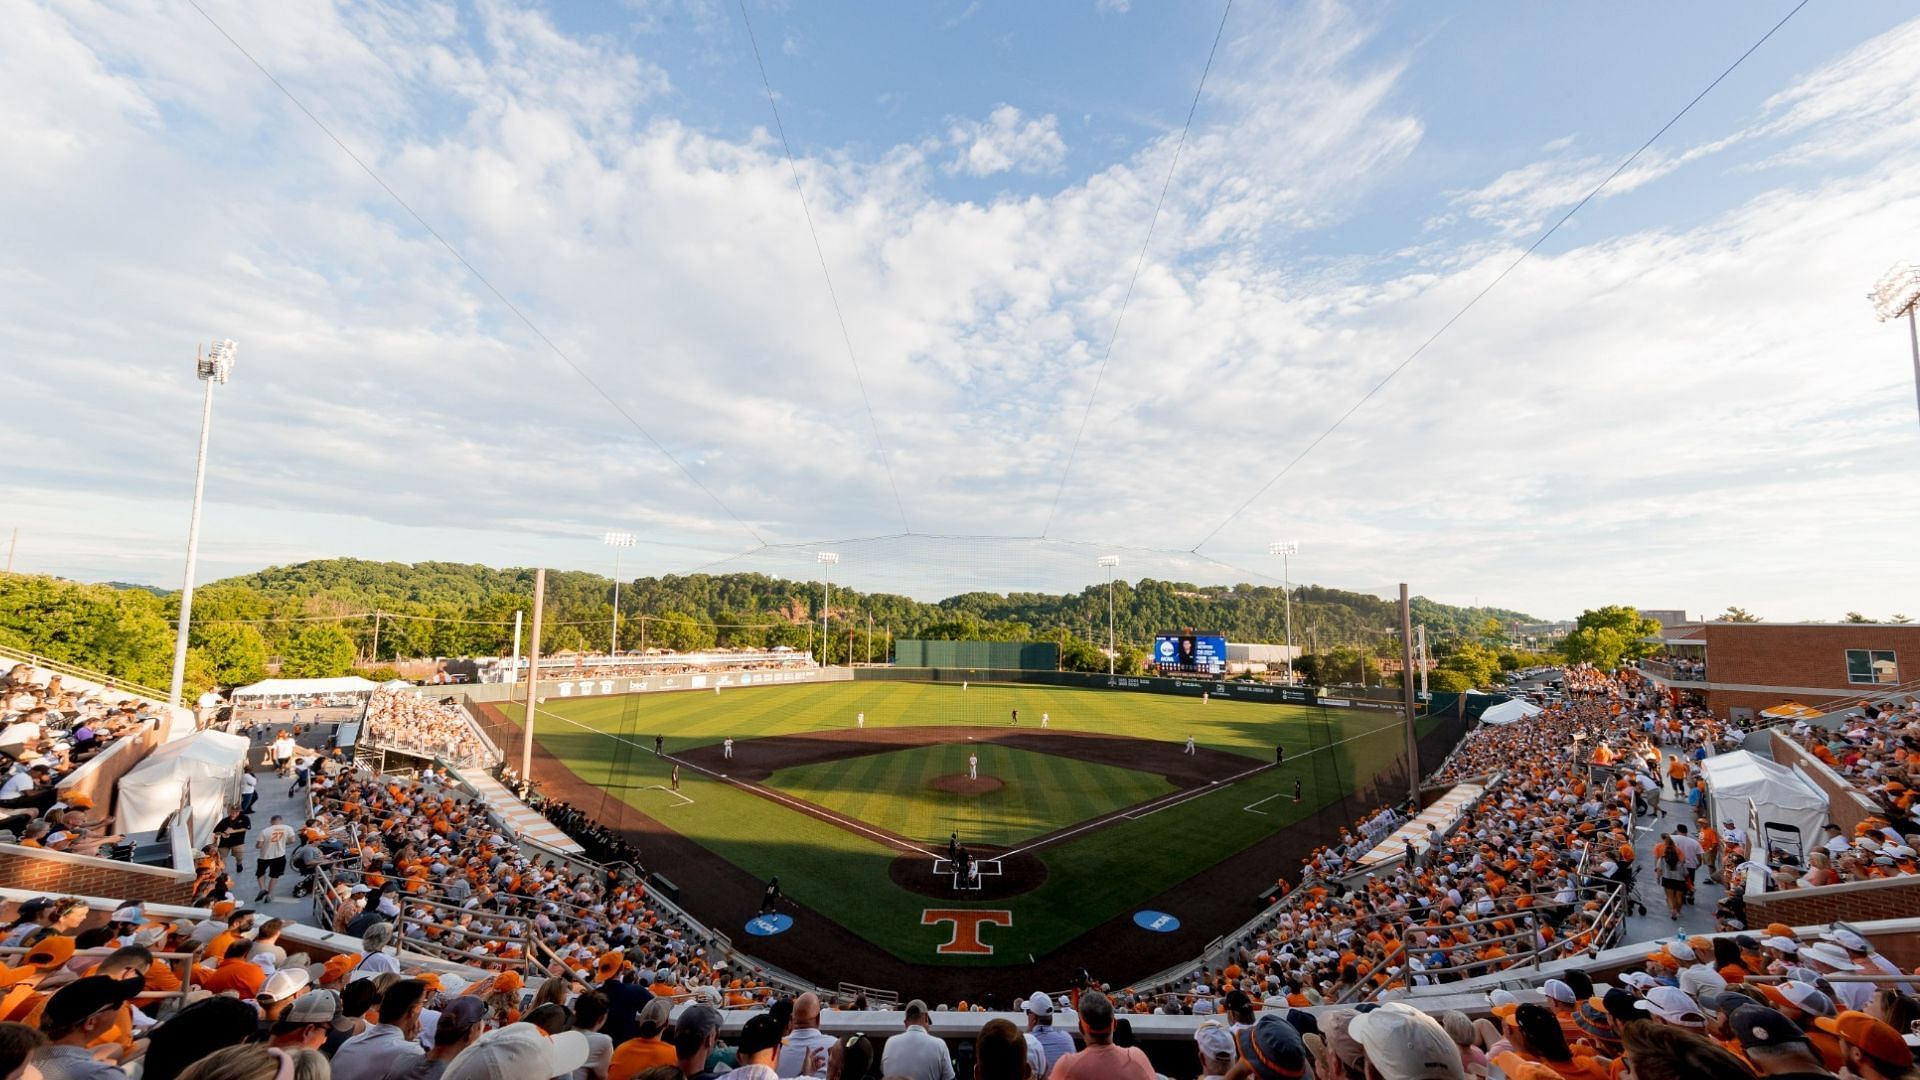 Image courtesy of Tennessee Athletics